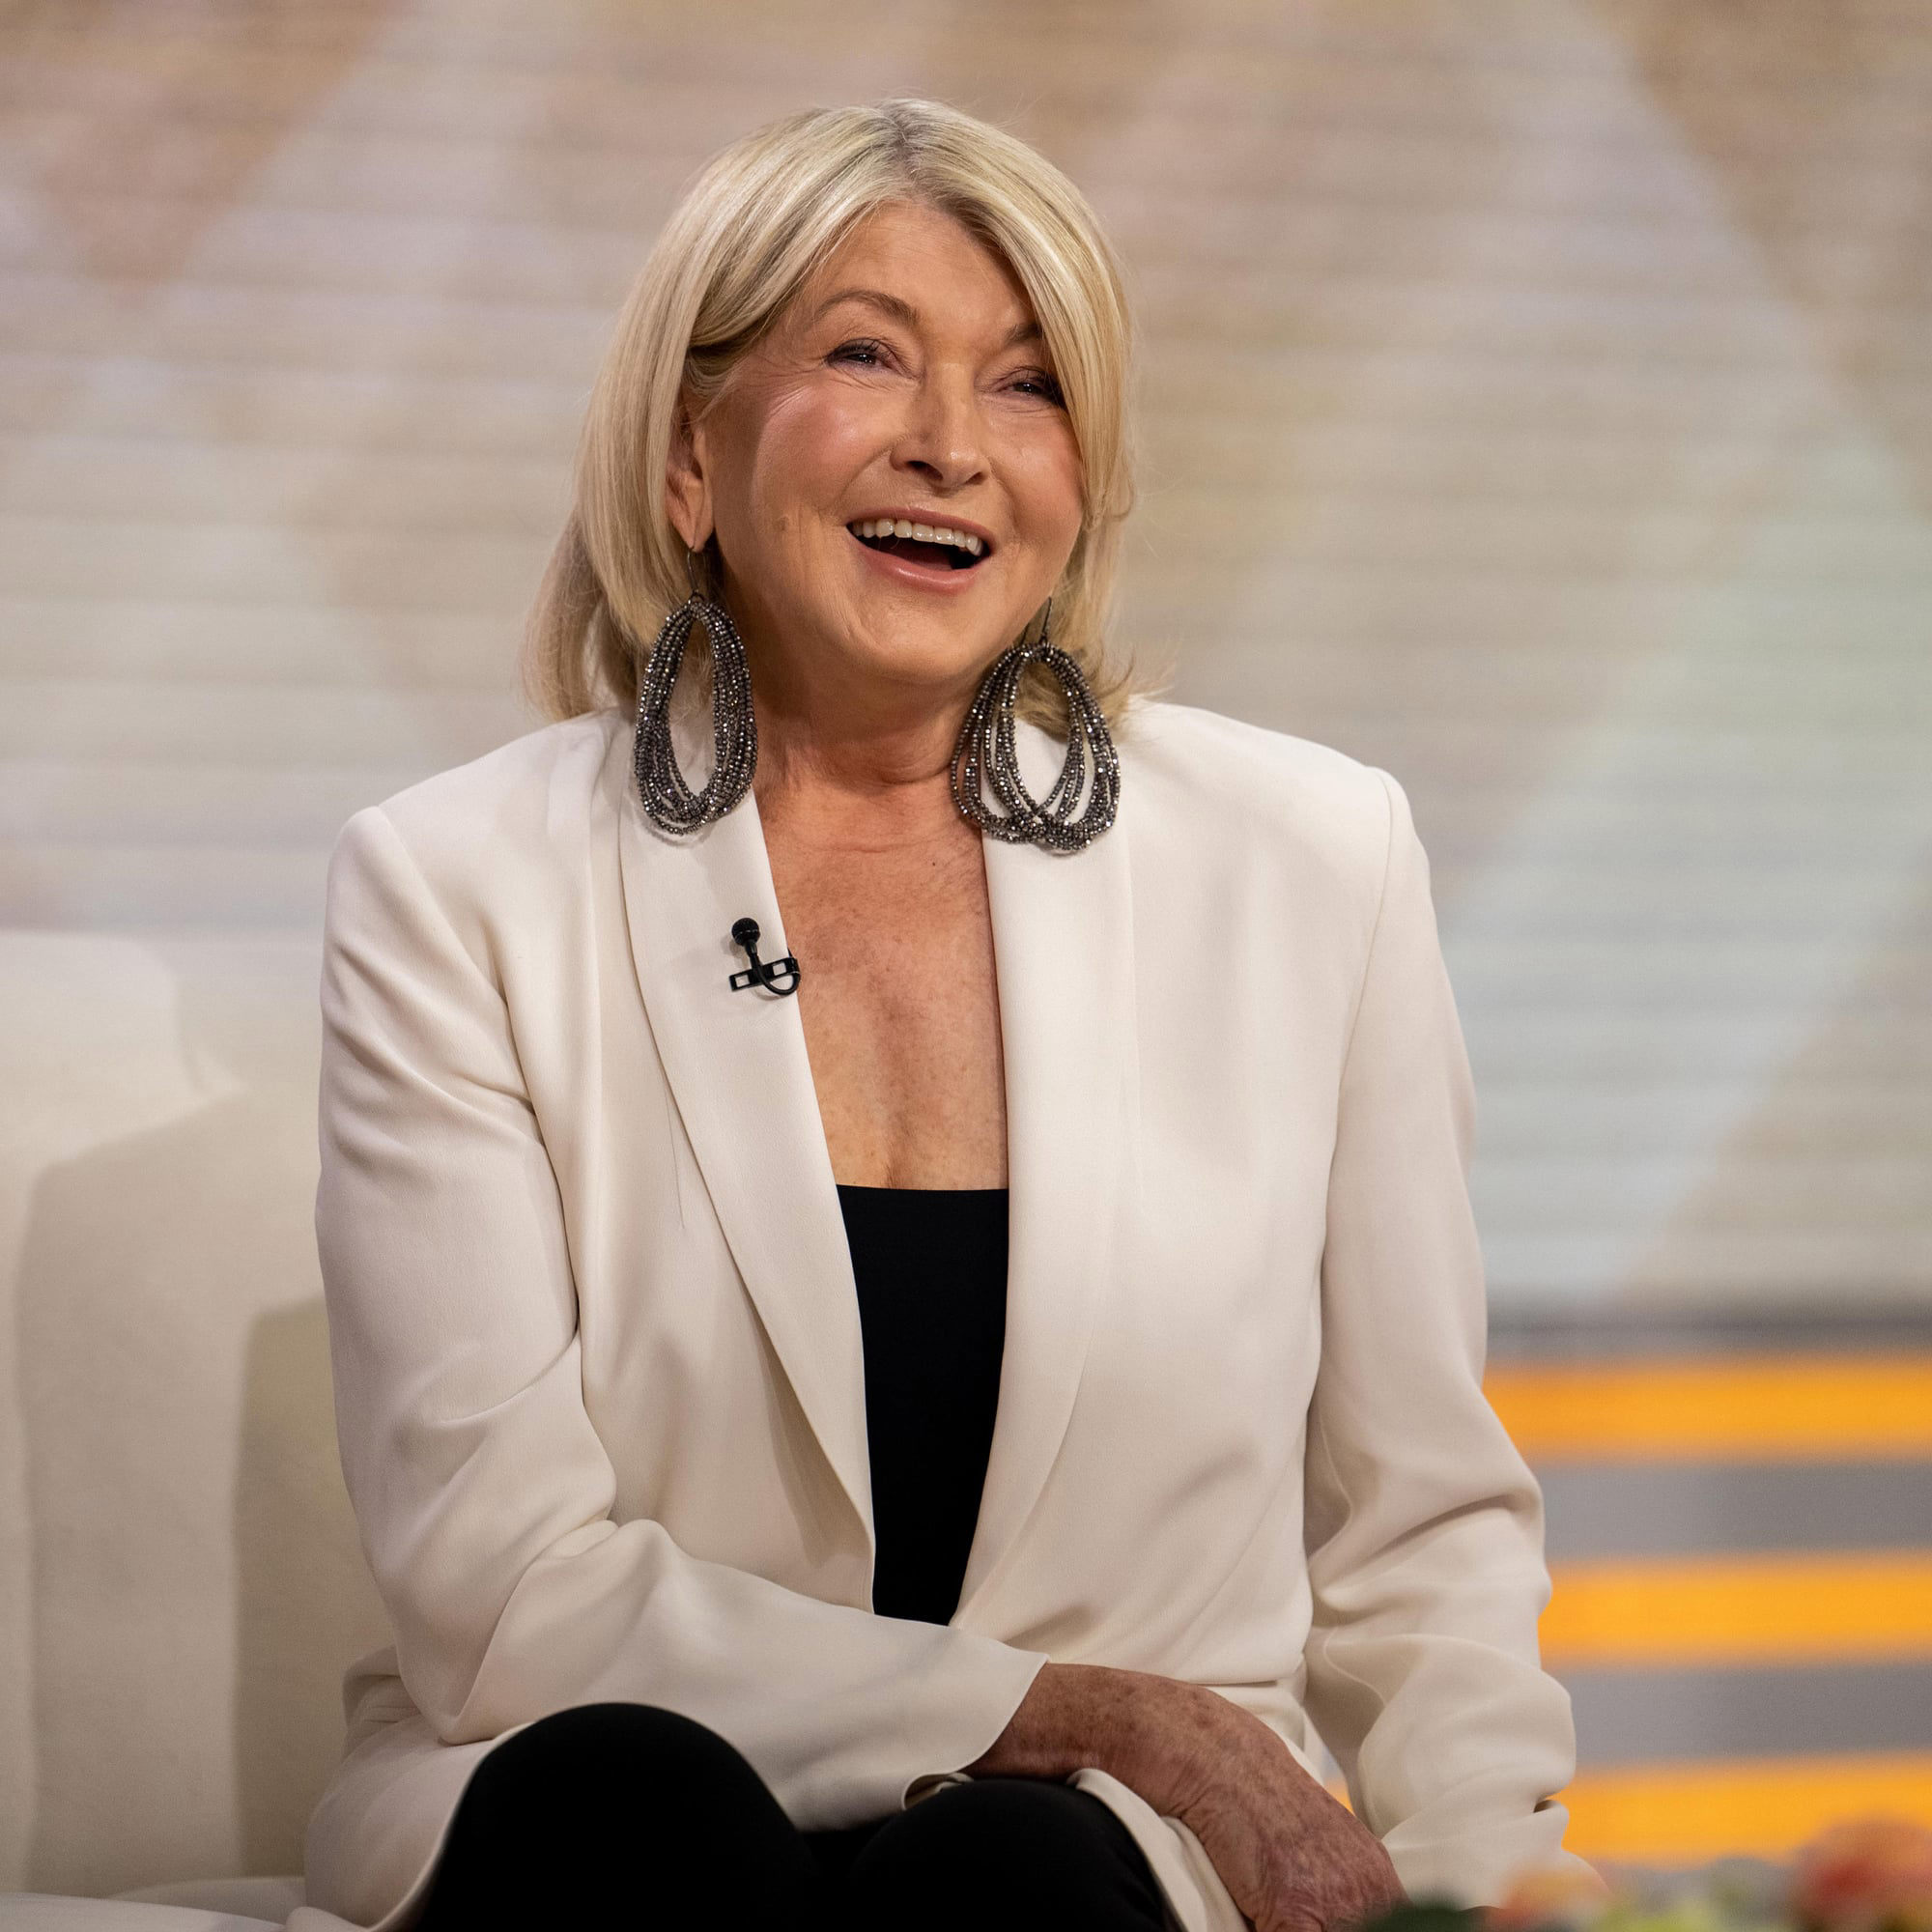 Dressing For Her Age? Martha Stewart Jokes She's Dressed the Same Since 17